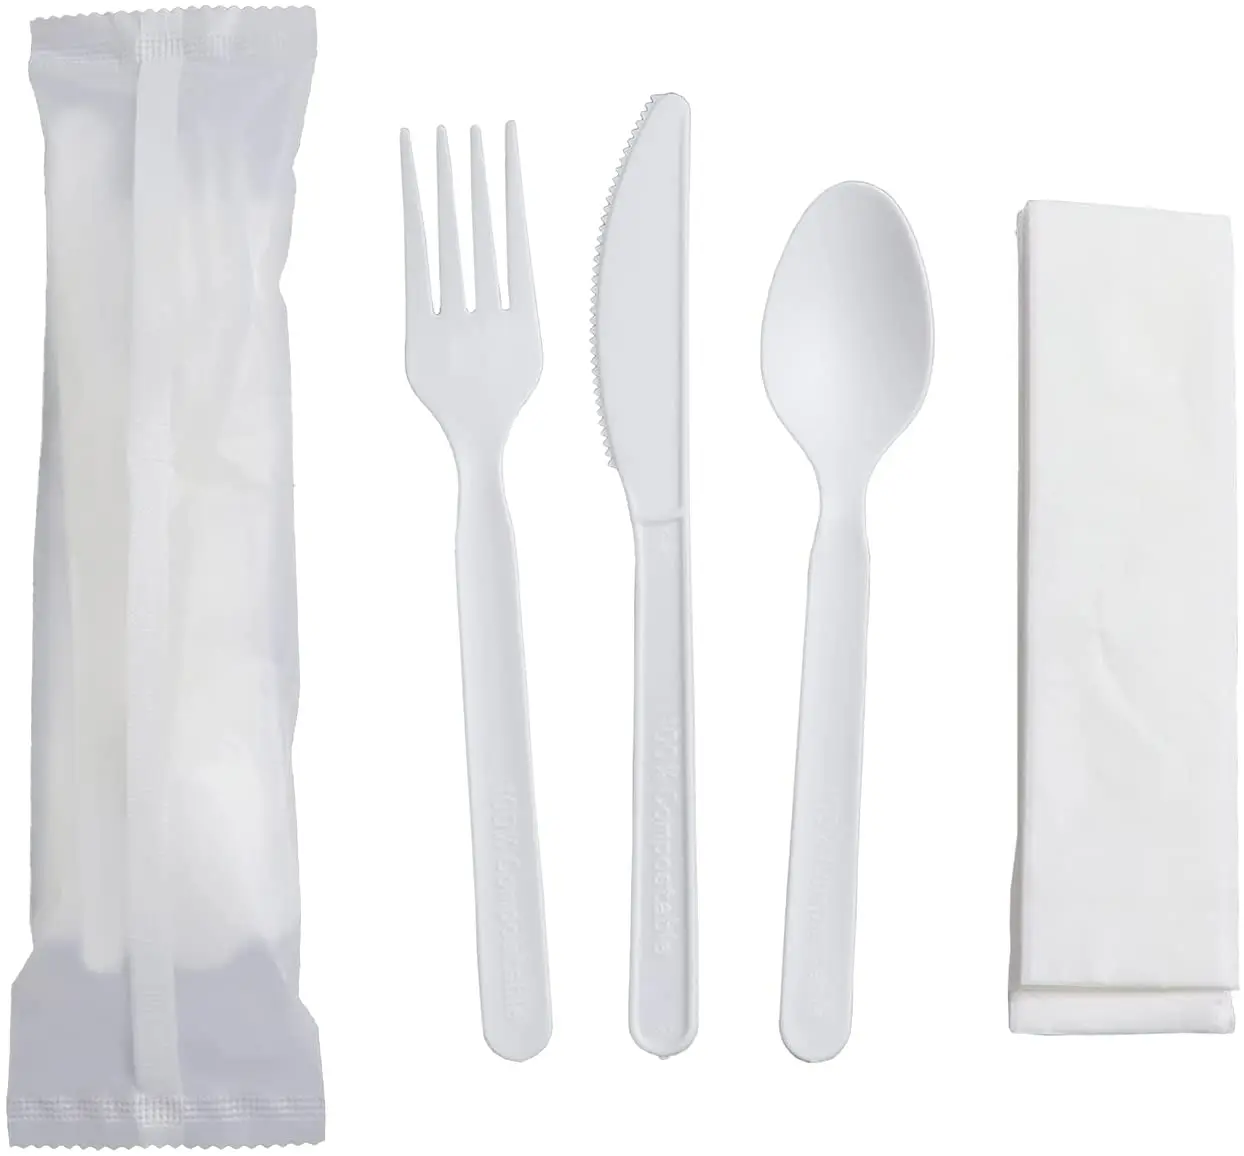 

7" Heavyduty Compostable CPLA Cutlery Kits,500 Sets (Fork, Spoon,Knife,Napkin 4 in 1) Individually Wrapped With Compostable Bag, White